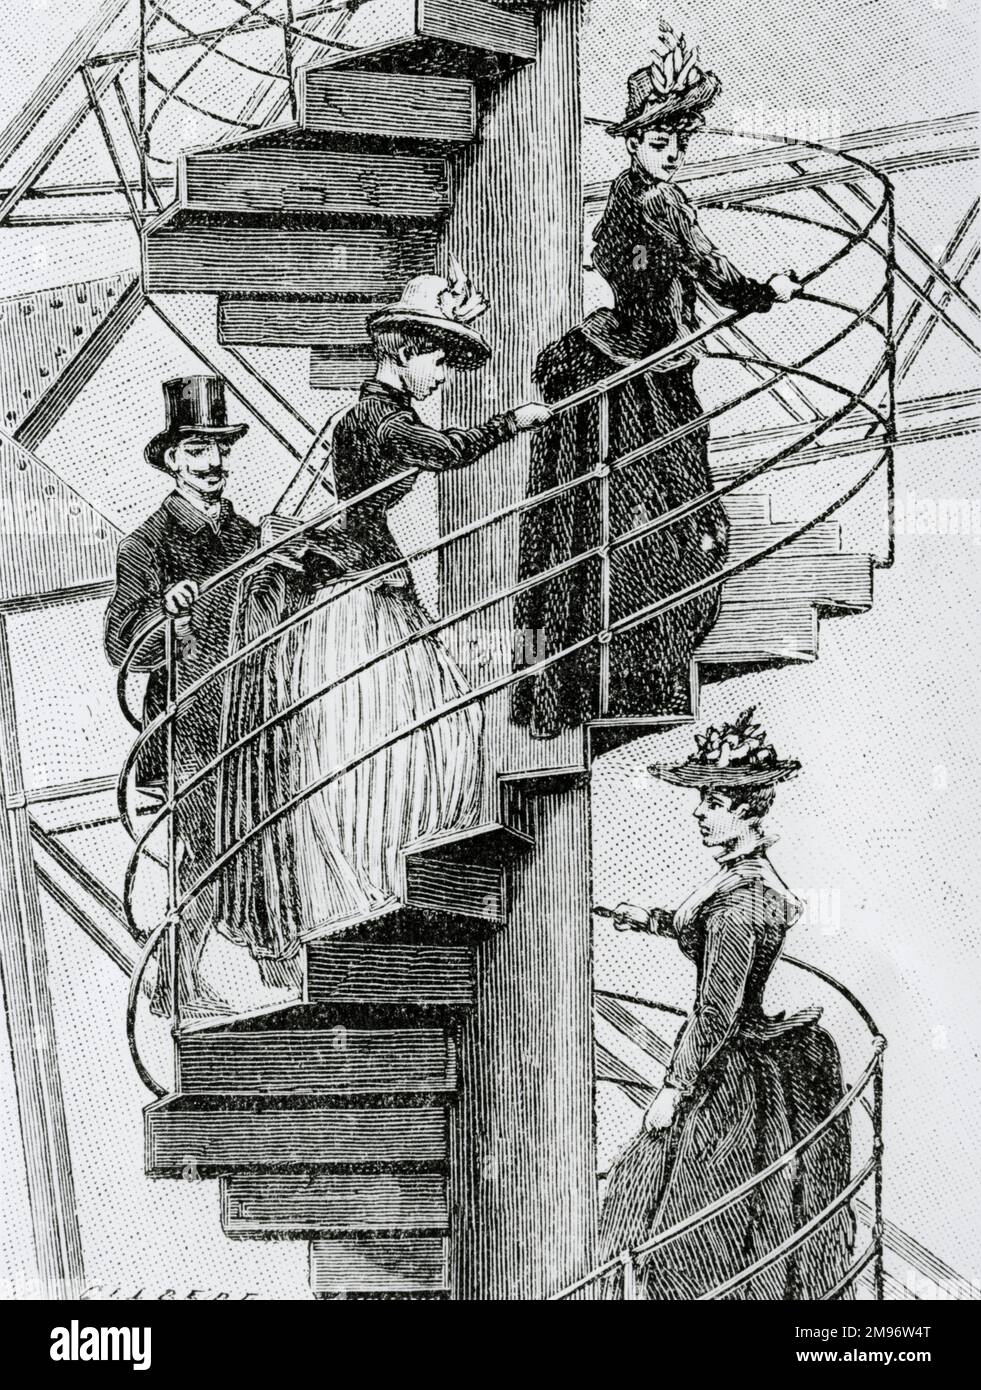 Eiffel Tower., tour of people climbing spiral staircase., eng., 1889 (Acc.No.7202) Stock Photo